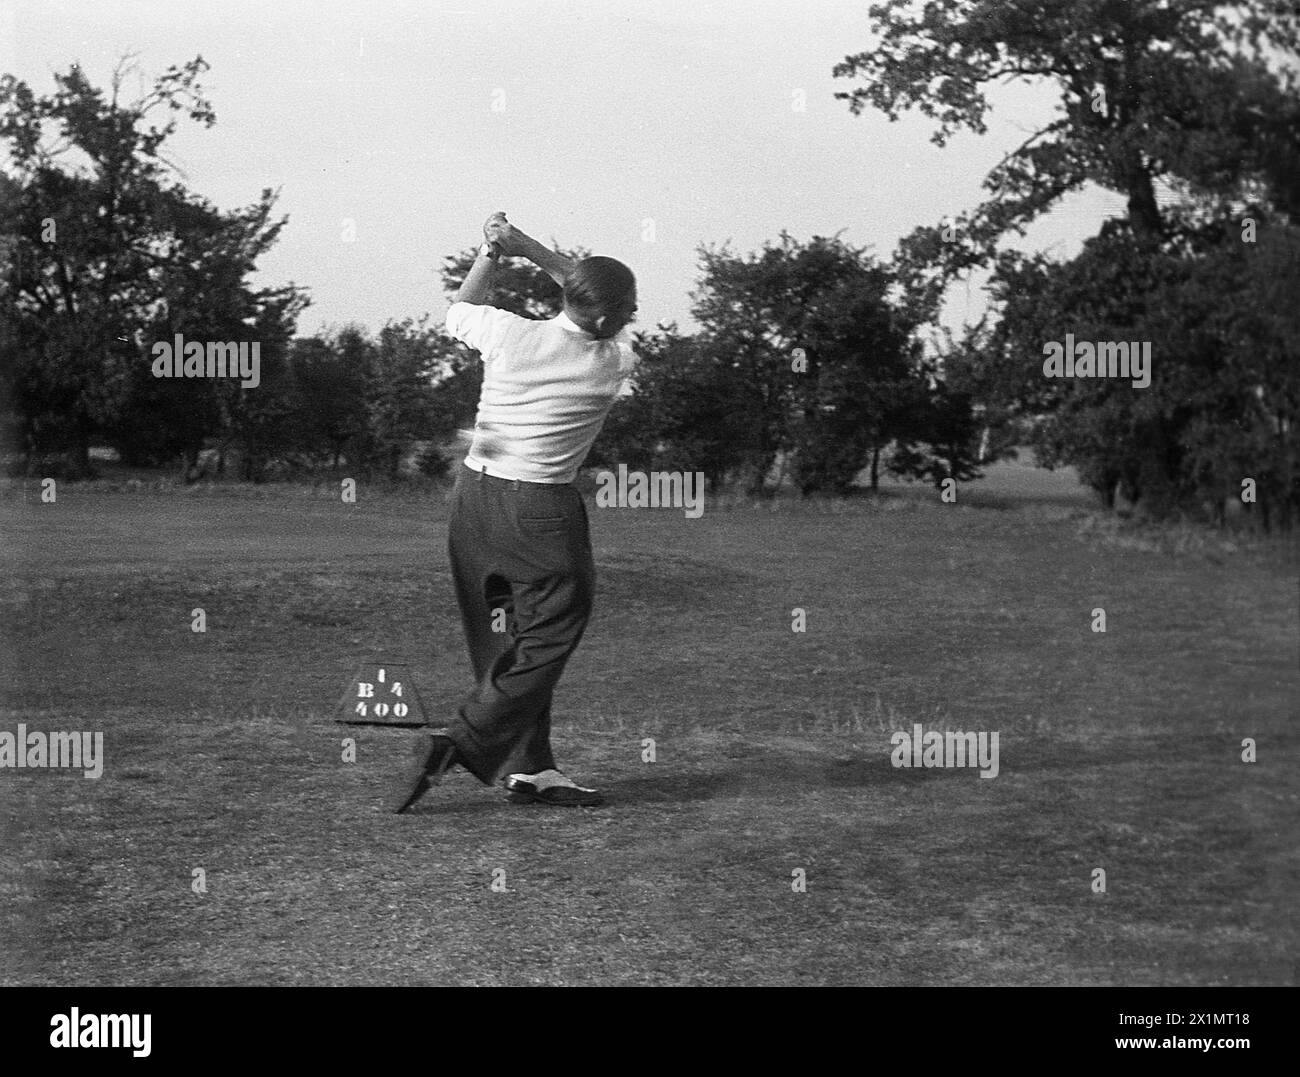 1950s, historical, an adult male golfer striking a ball off the tee on an inland golf course, England, UK. Stock Photo